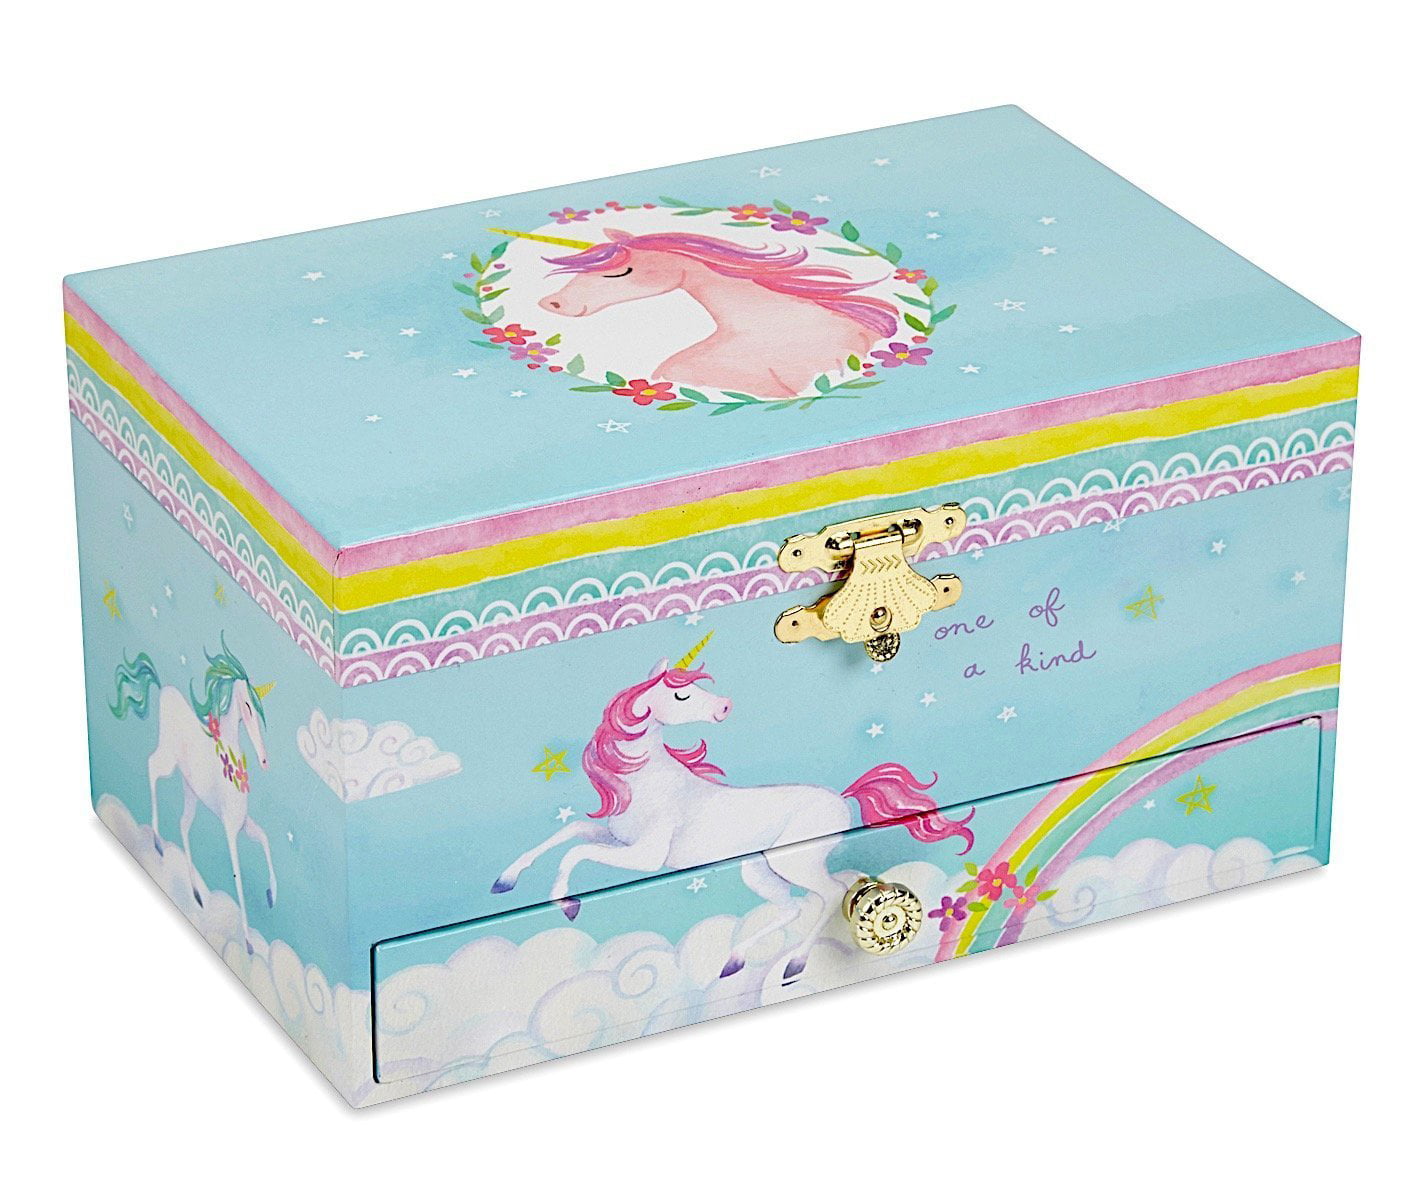 Jewelkeeper - Girl's Musical Jewelry Storage Box with Pullout Drawer ...